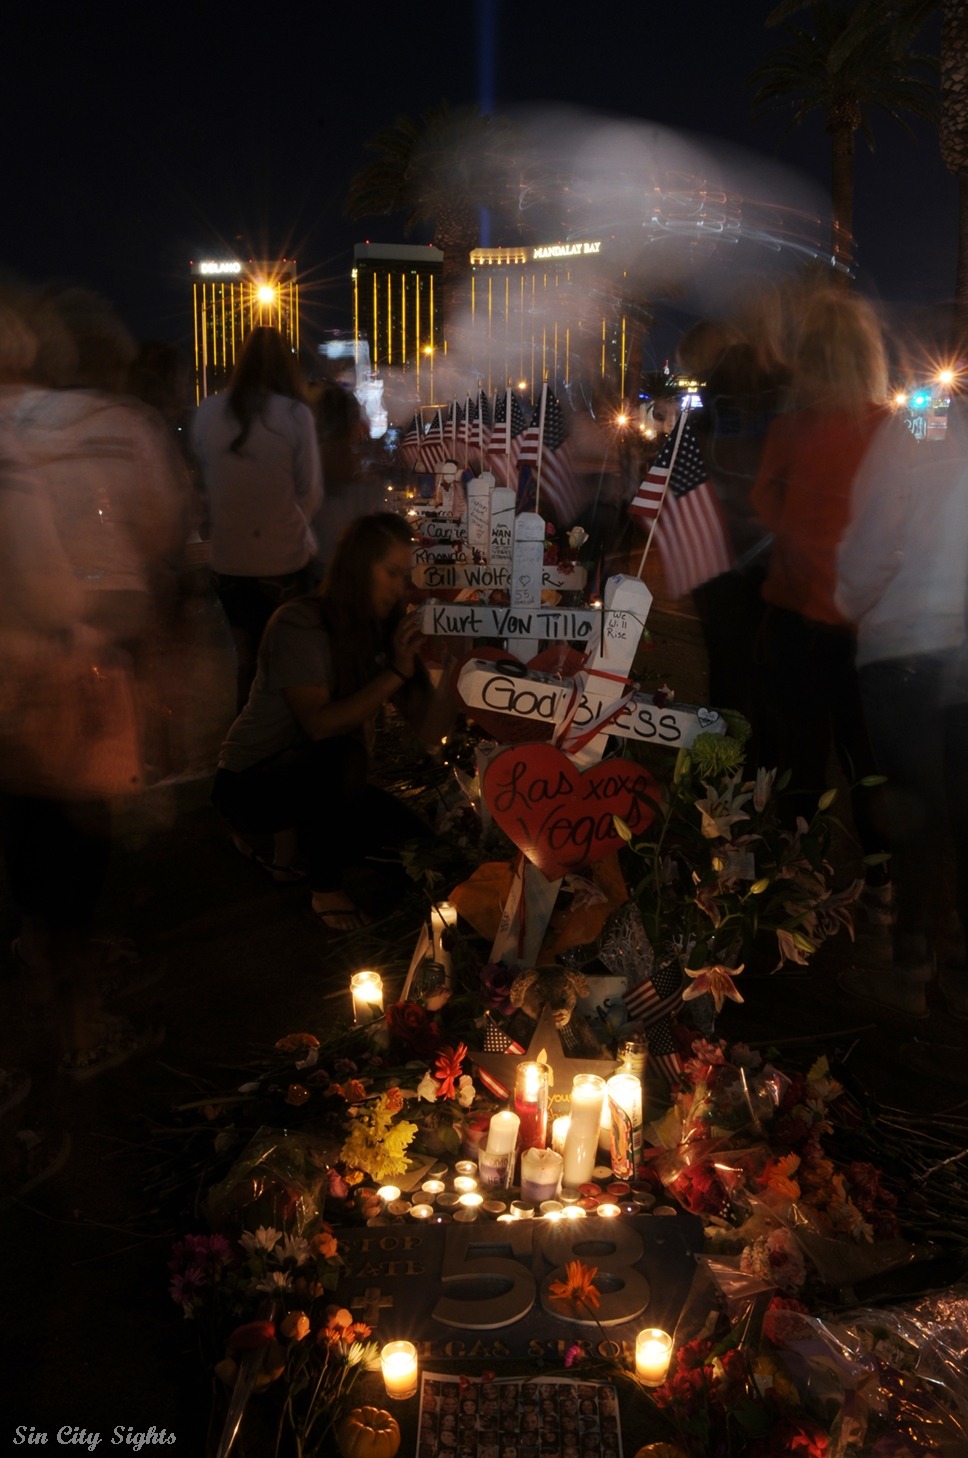   Las Vegas Strong. If you live in Vegas I suggest you go down to see the memorial